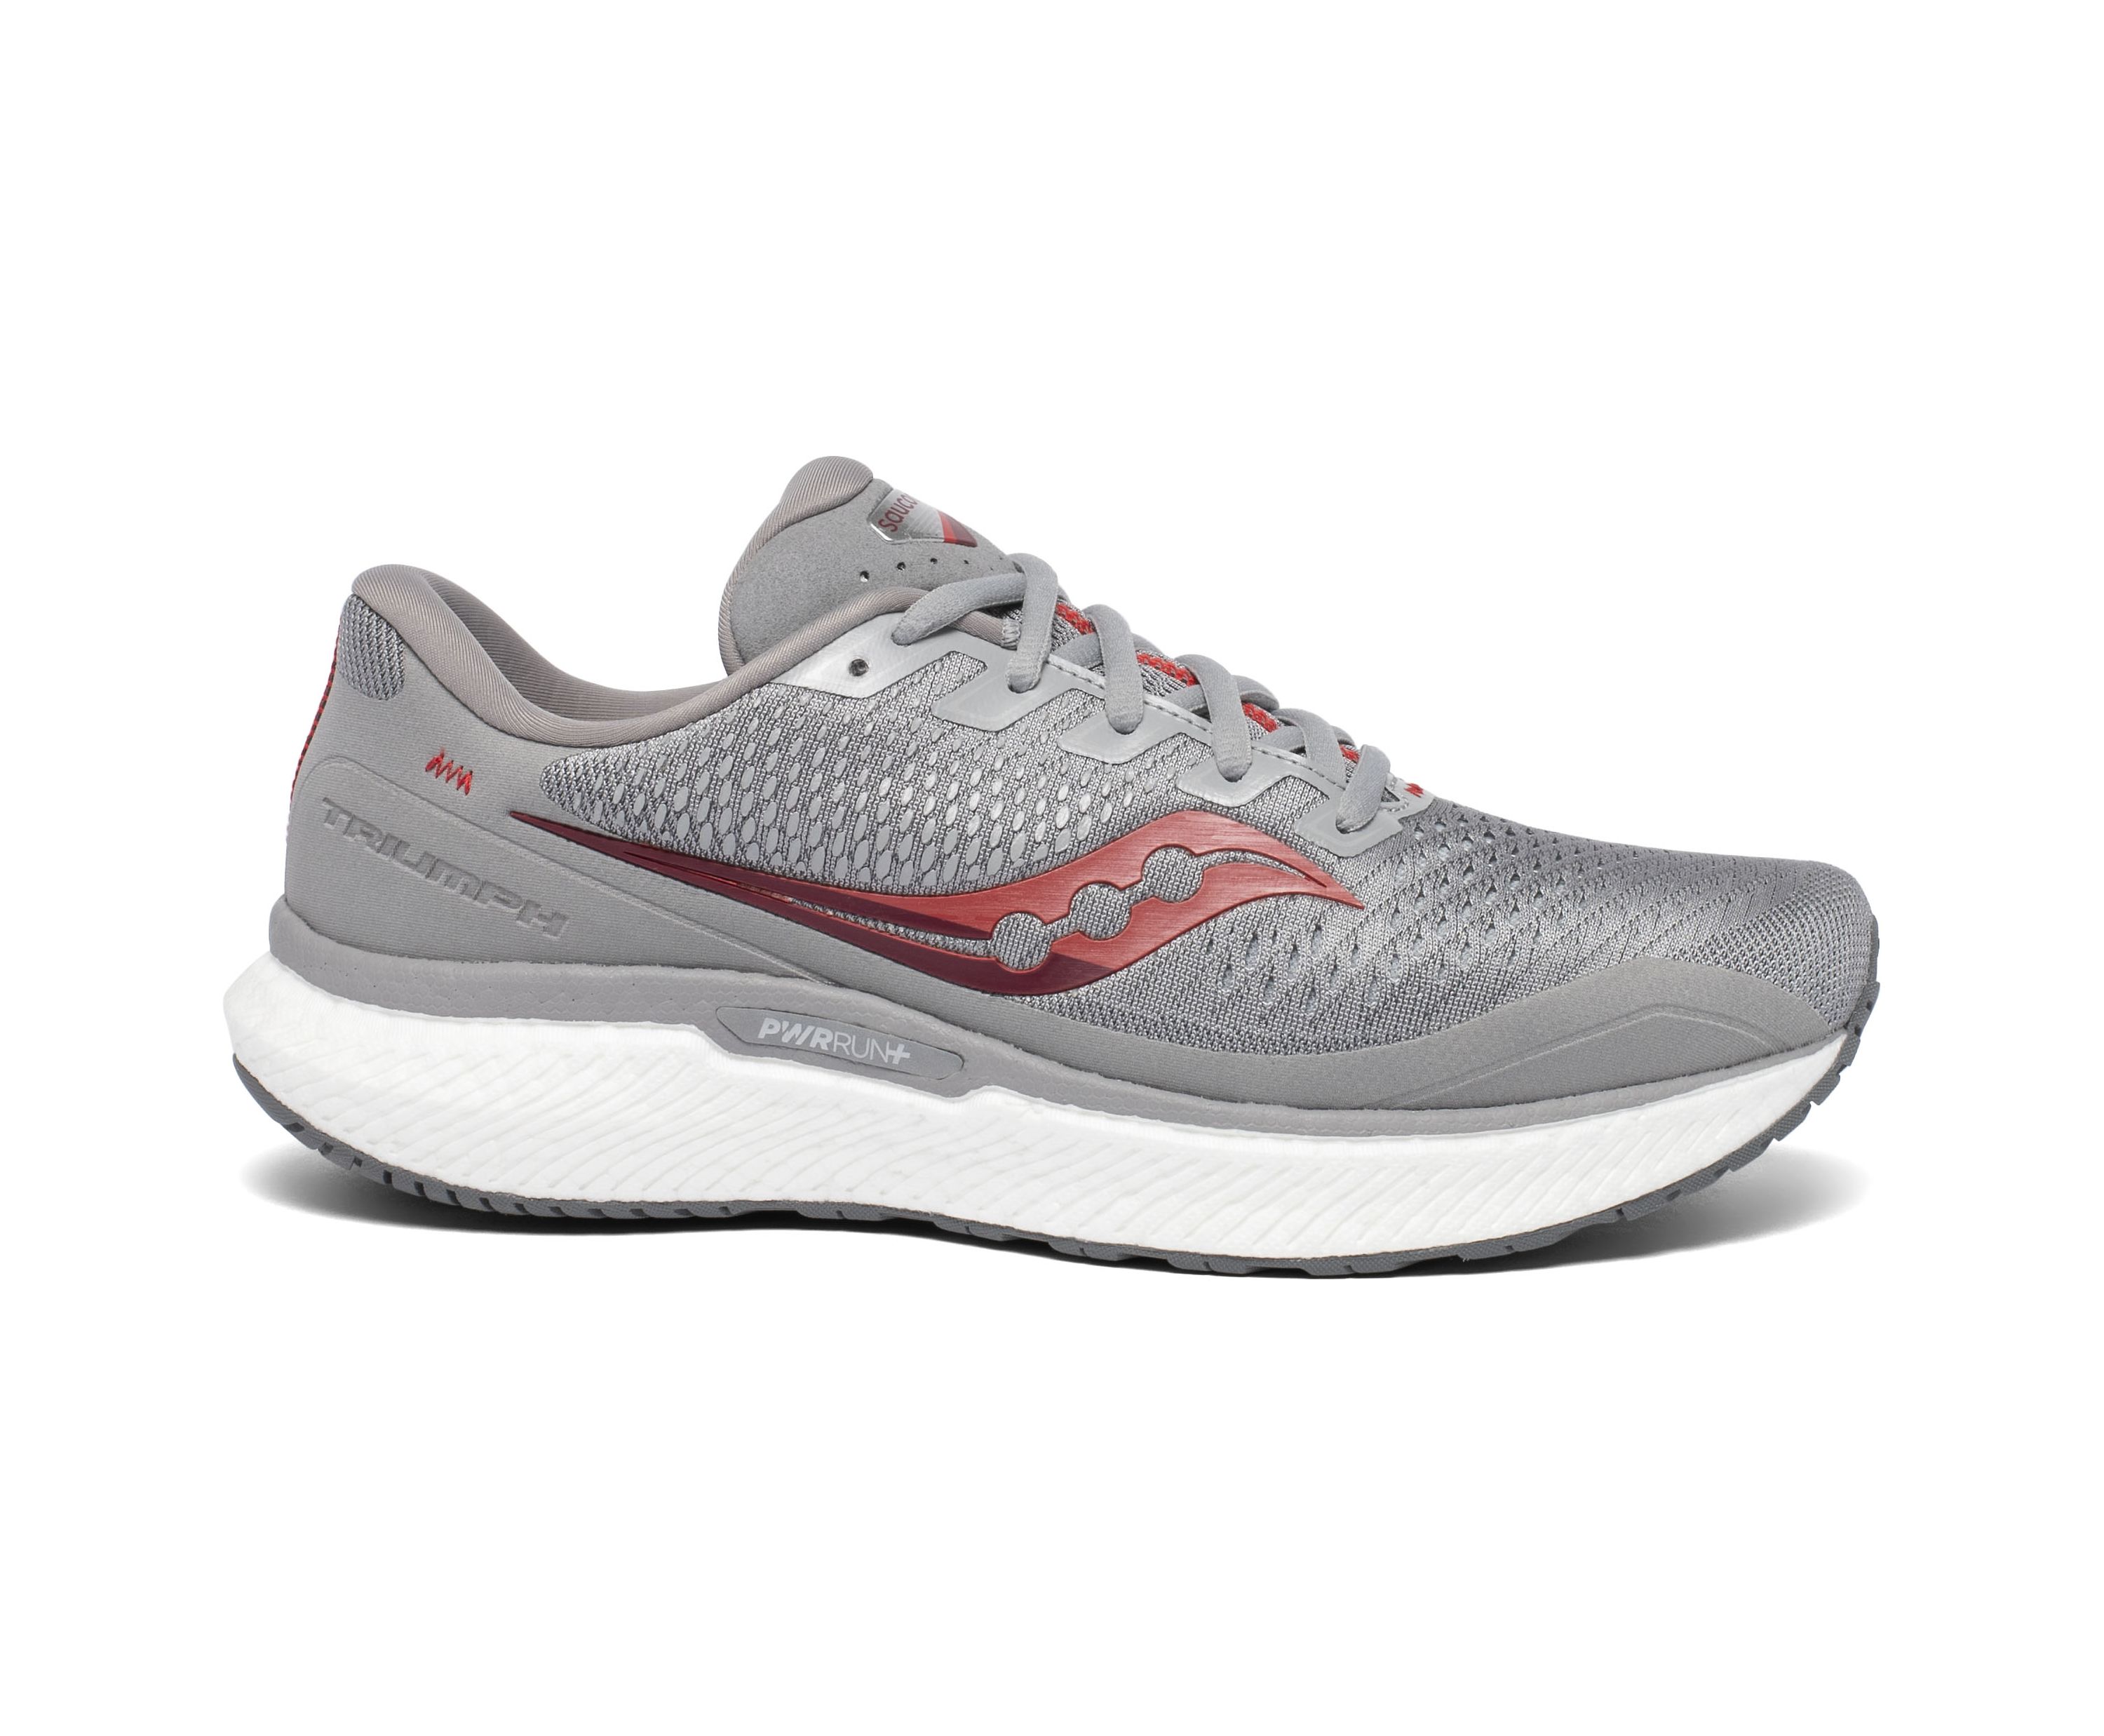 Saucony Men's Triumph 18 Wide Running Shoe - Alloy/Red